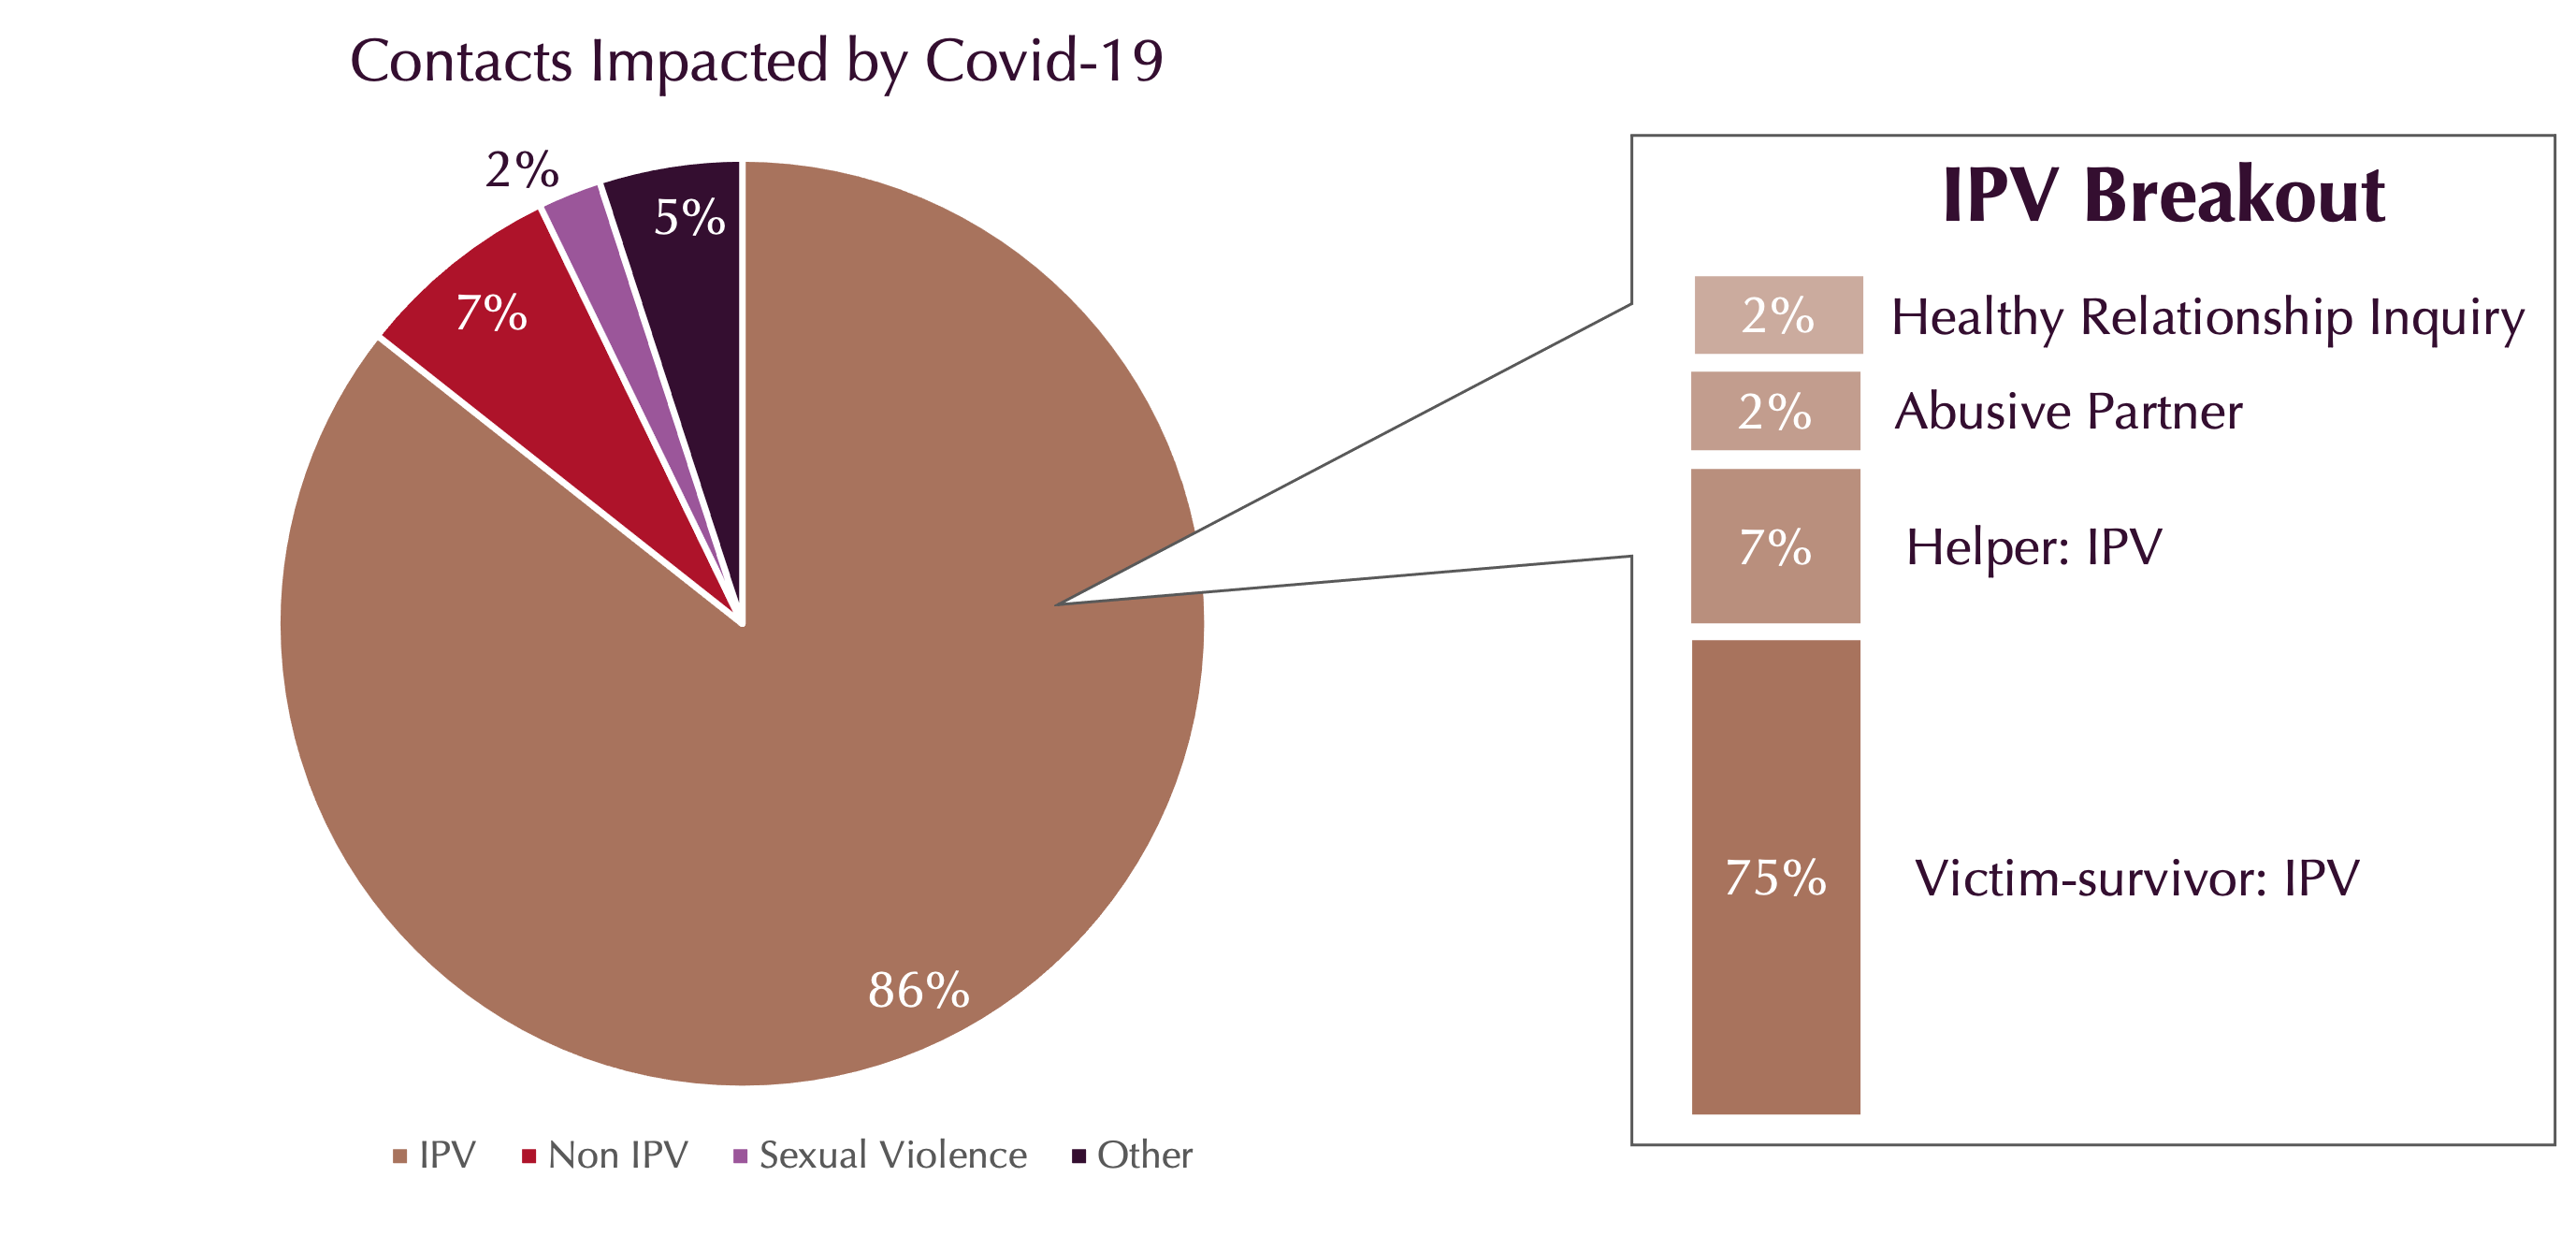 Contacts impacted by COVID 19